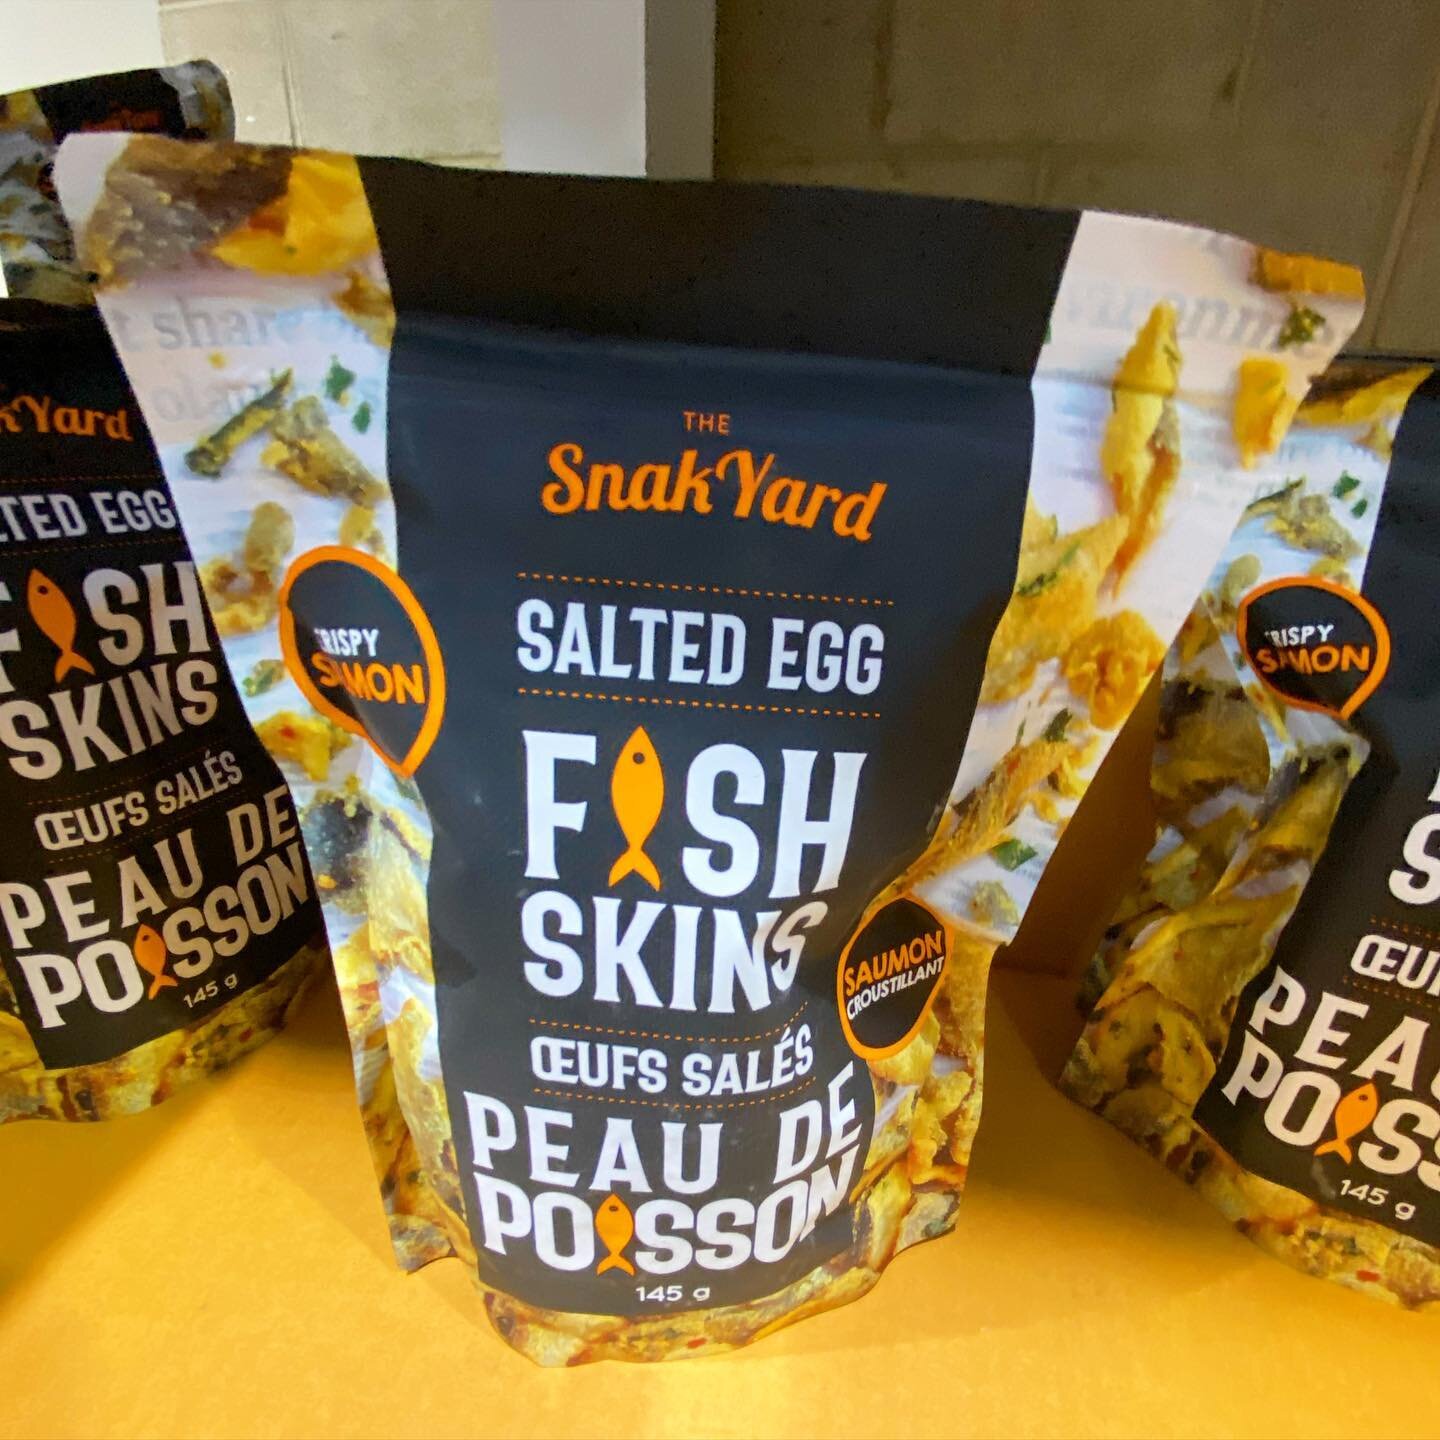 Salted Egg Fish Skins - this is a crunchy salmon skin with salted eggs. Price $13.99 📍Newmarket 
#costco #costcofindscanada #costcofinds #costcohaul #costcobuys #costcodelights #costcodeals #costcowholesale #costcodoesitagain #costcoeverything #cost